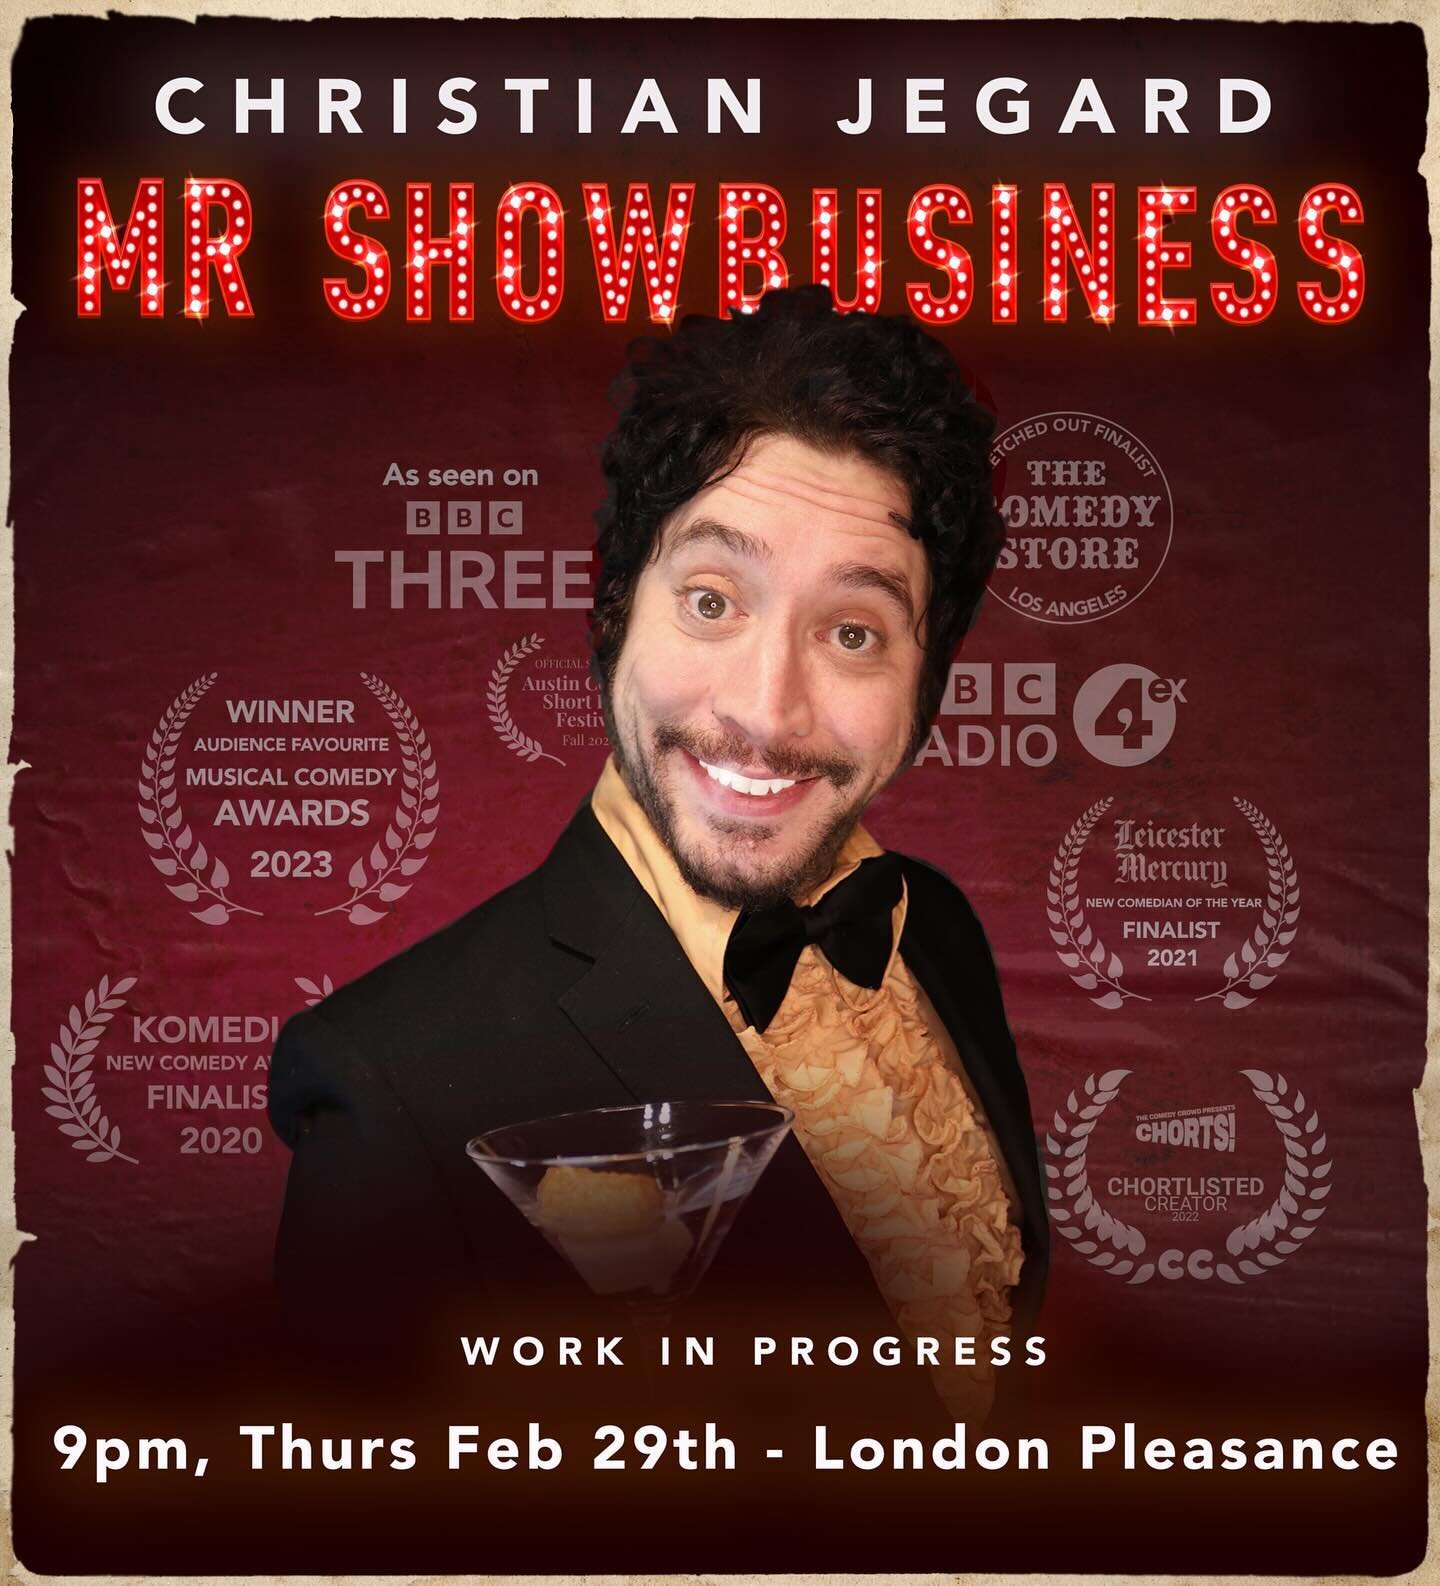 London! A week from today (Thursday 29th Feb, 9PM) I&rsquo;m doing my Work in Progress show &lsquo;Mr Showbusiness&rsquo; at The Pleasance Studio Theatre in Islington! Get FREE tickets using the promo code WIPFREE - link in bio! (Or visit Pleasance.c